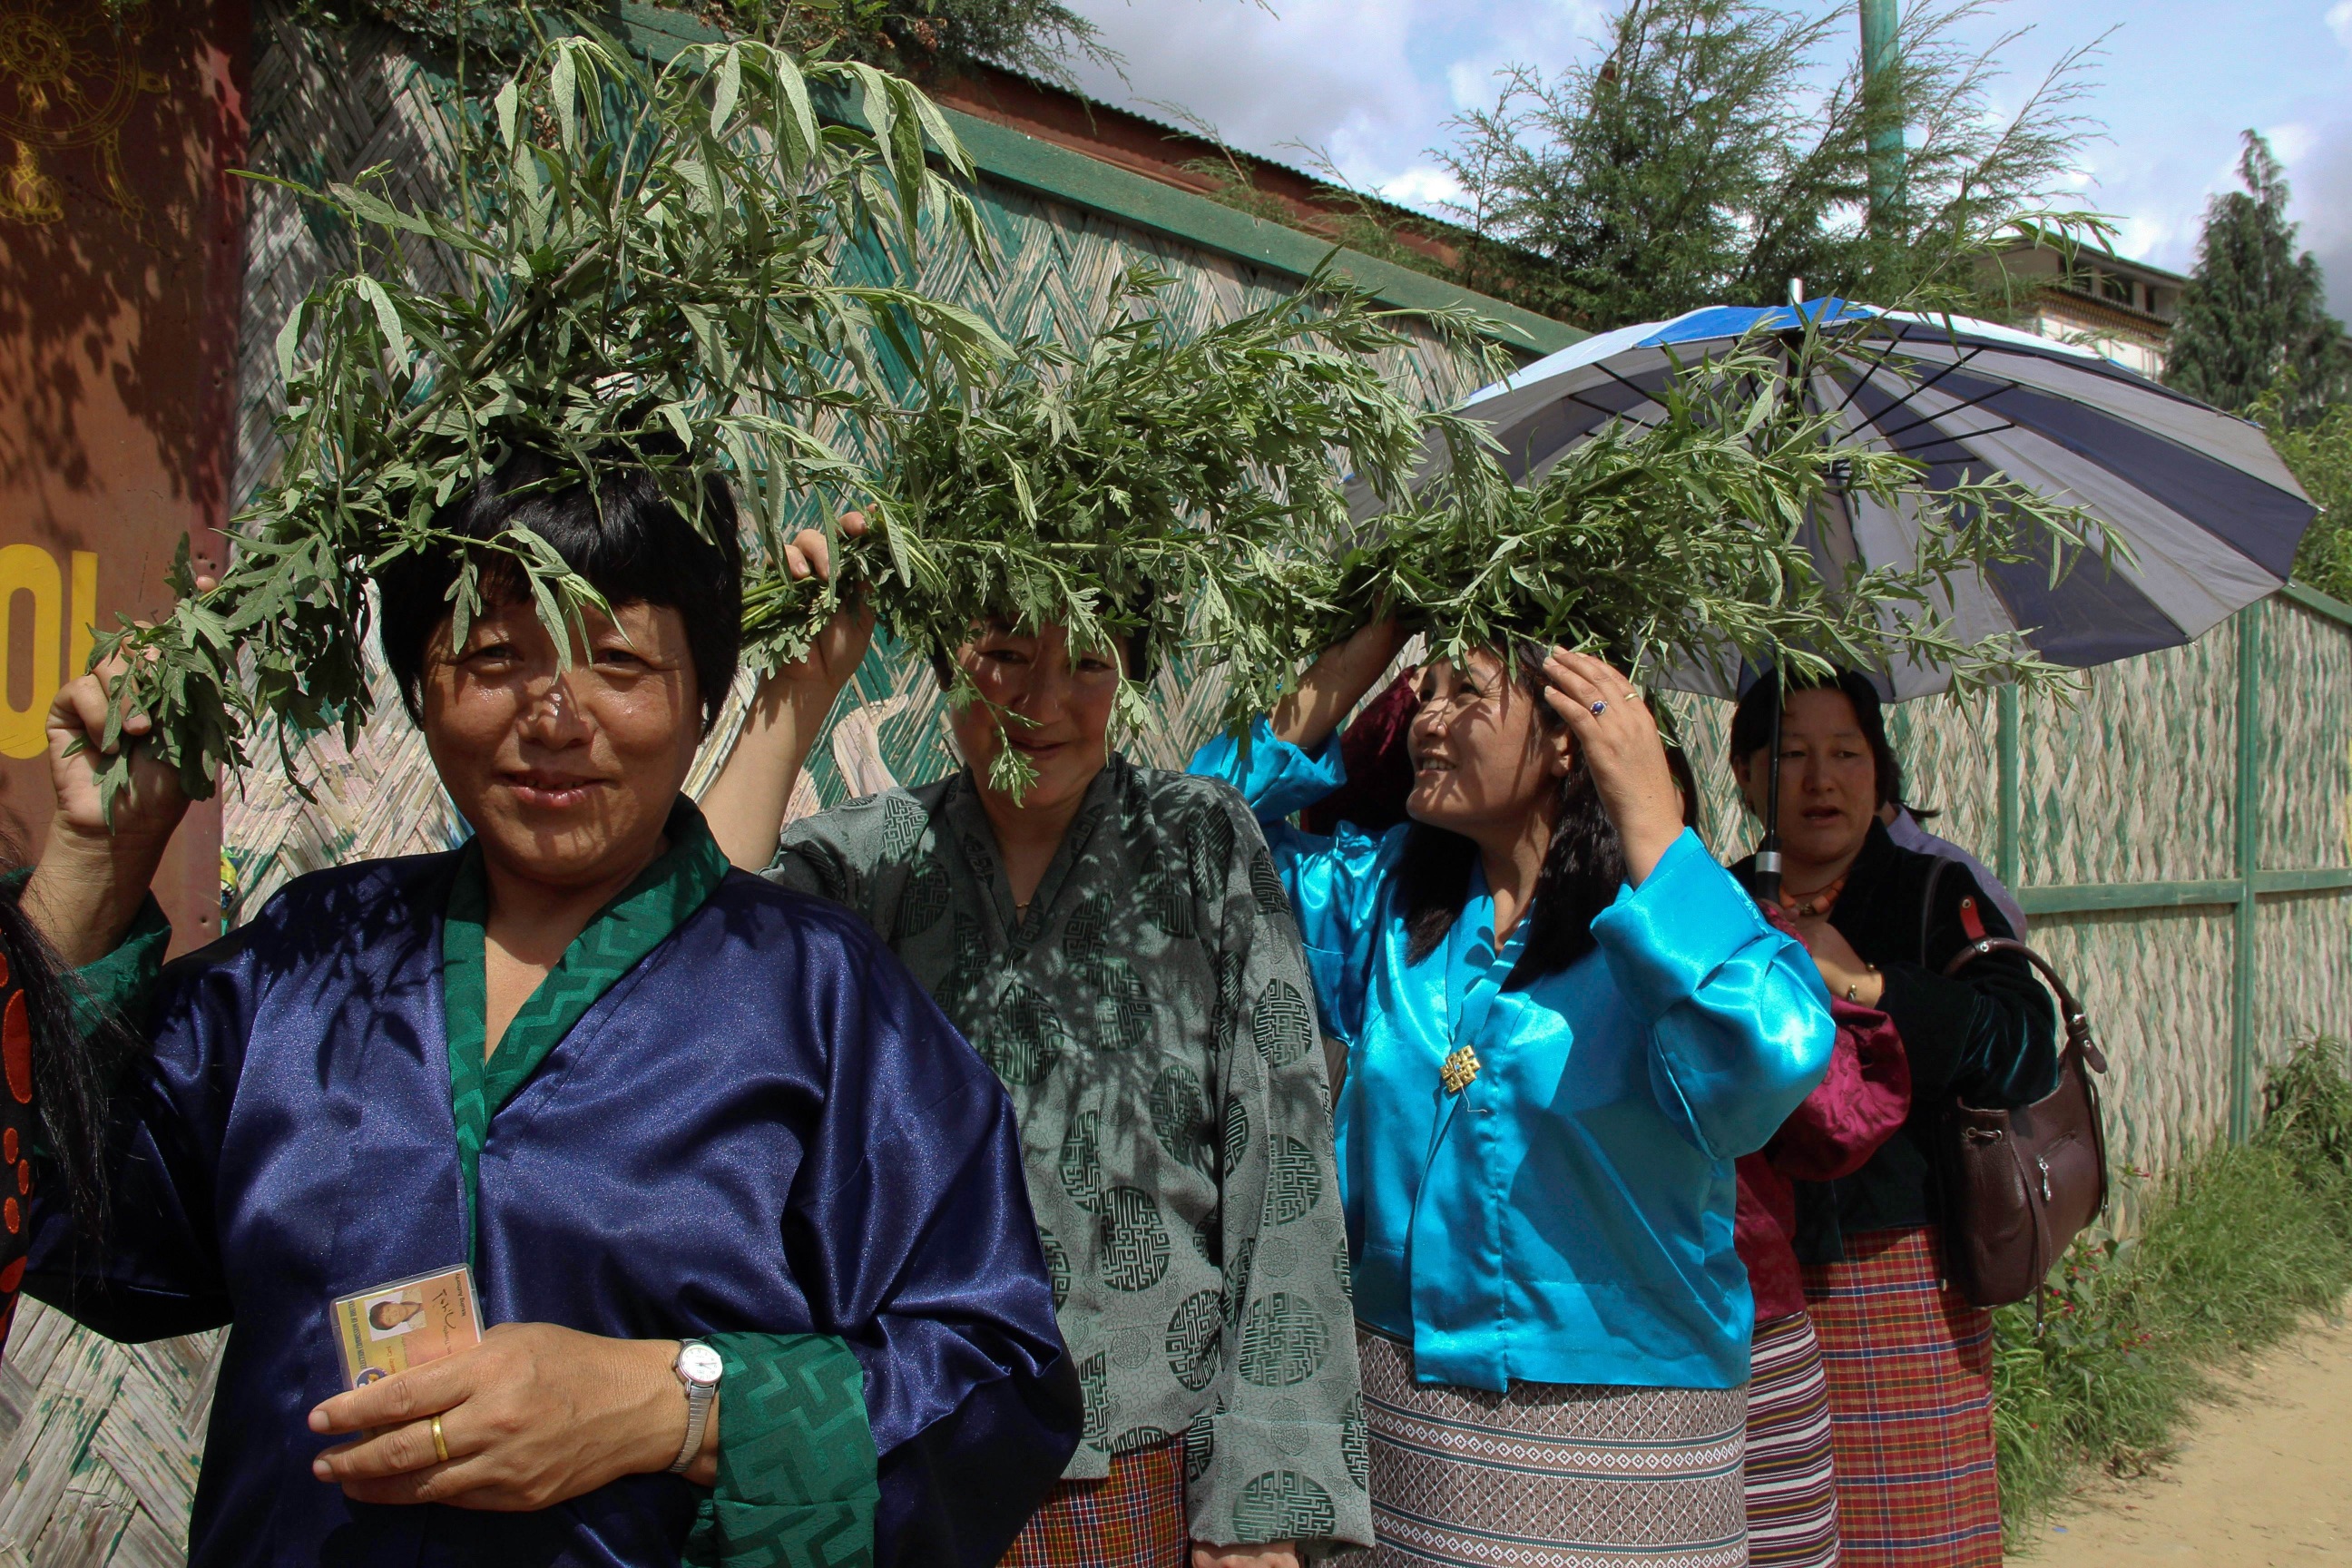 Bhutanese women wait in line to cast their votes at the Changbangdru polling station in Thimphu on Saturday. Photo: AP